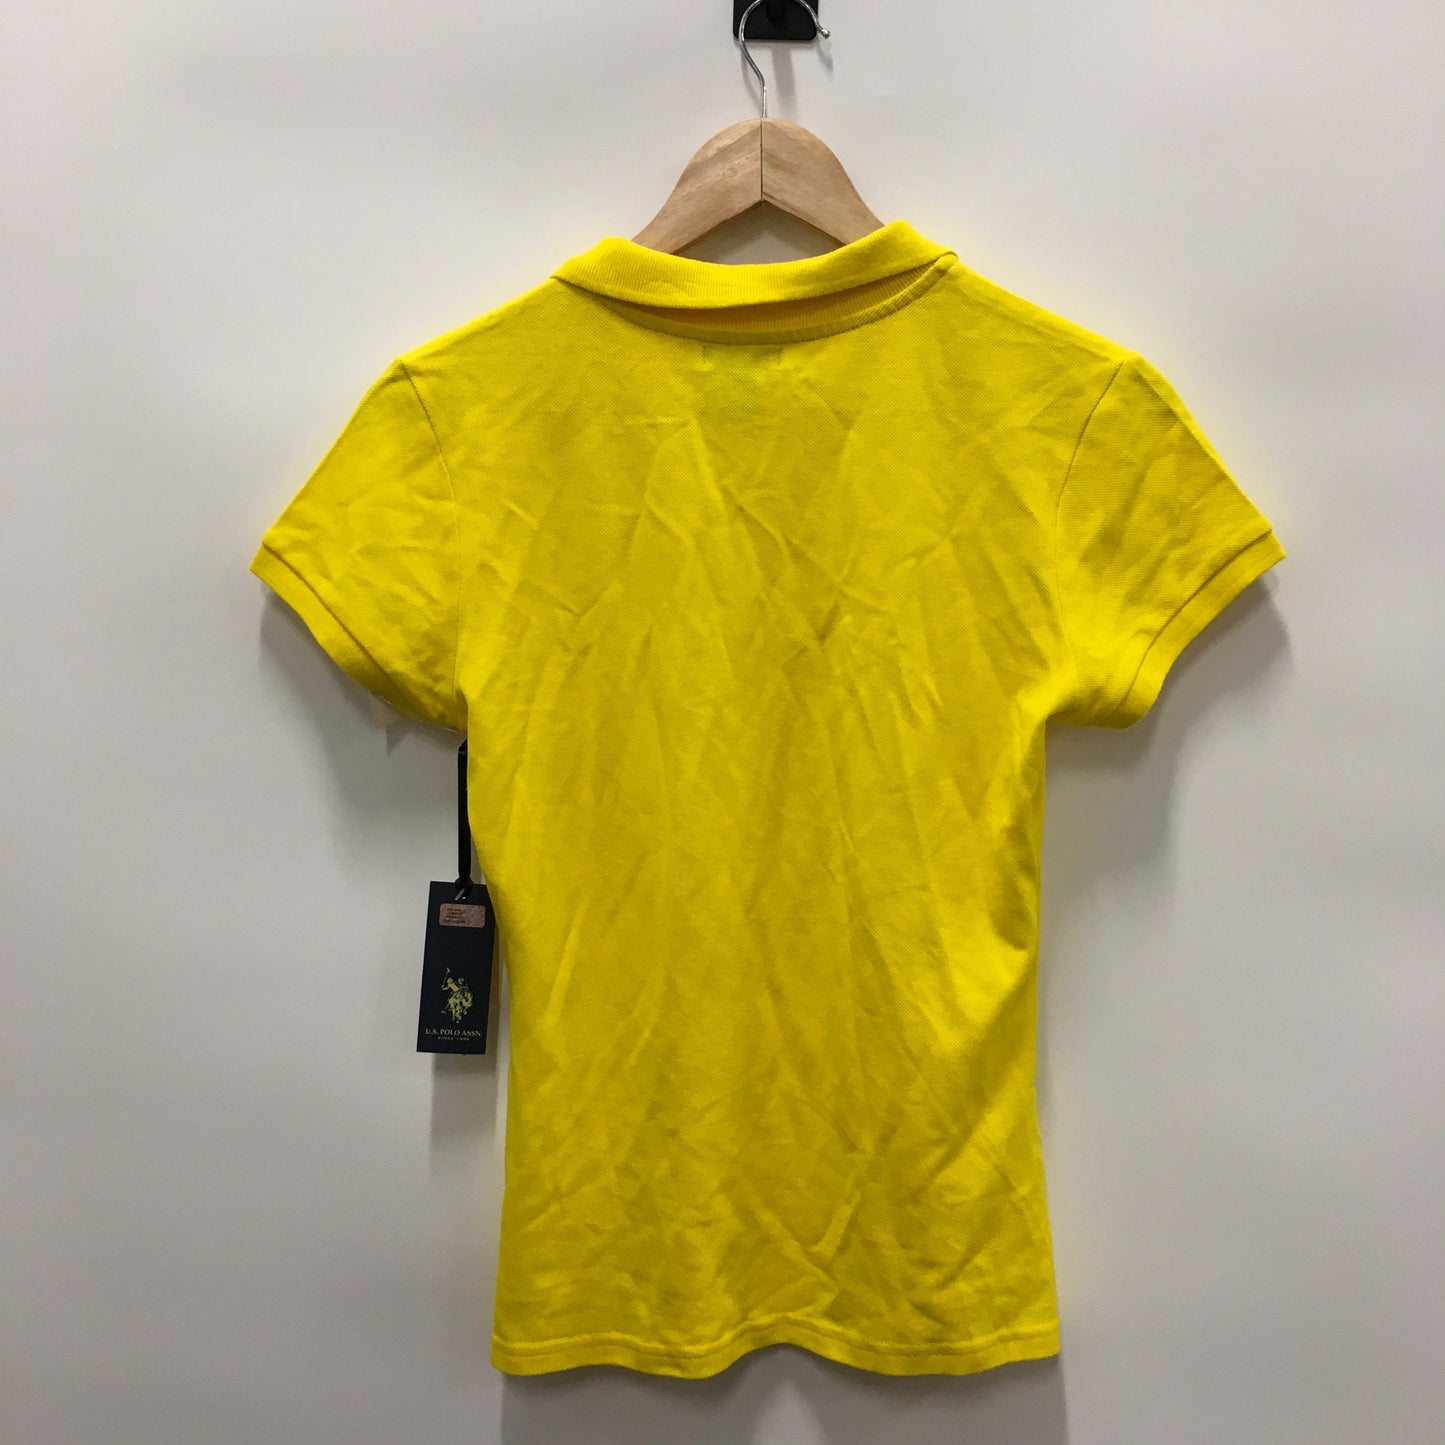 Yellow Top Short Sleeve Basic Us Polo Assoc, Size M